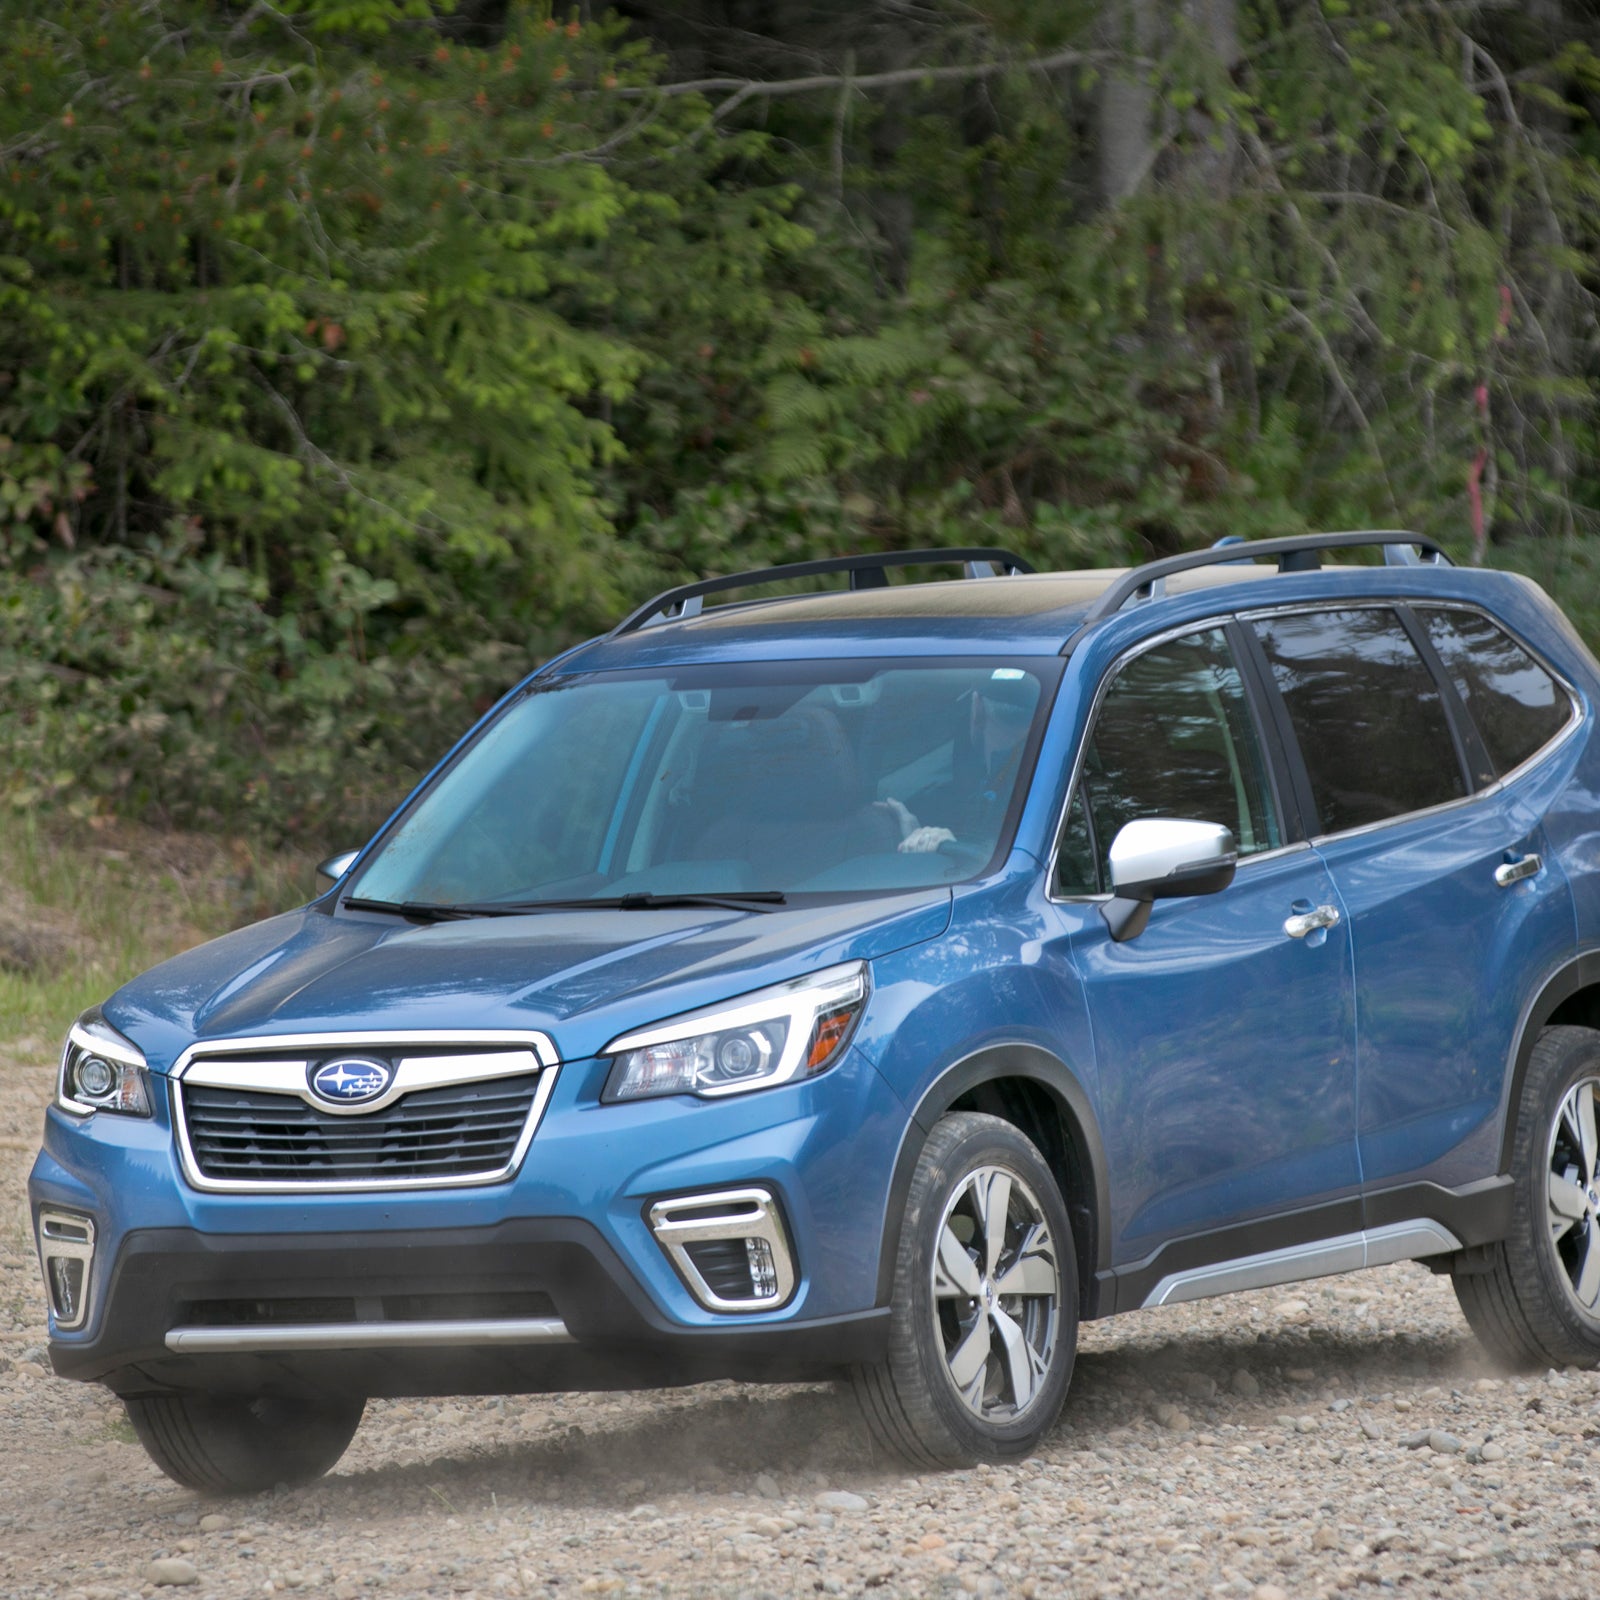 An Off-Road Review of the Subaru Forester Touring - Outside Online